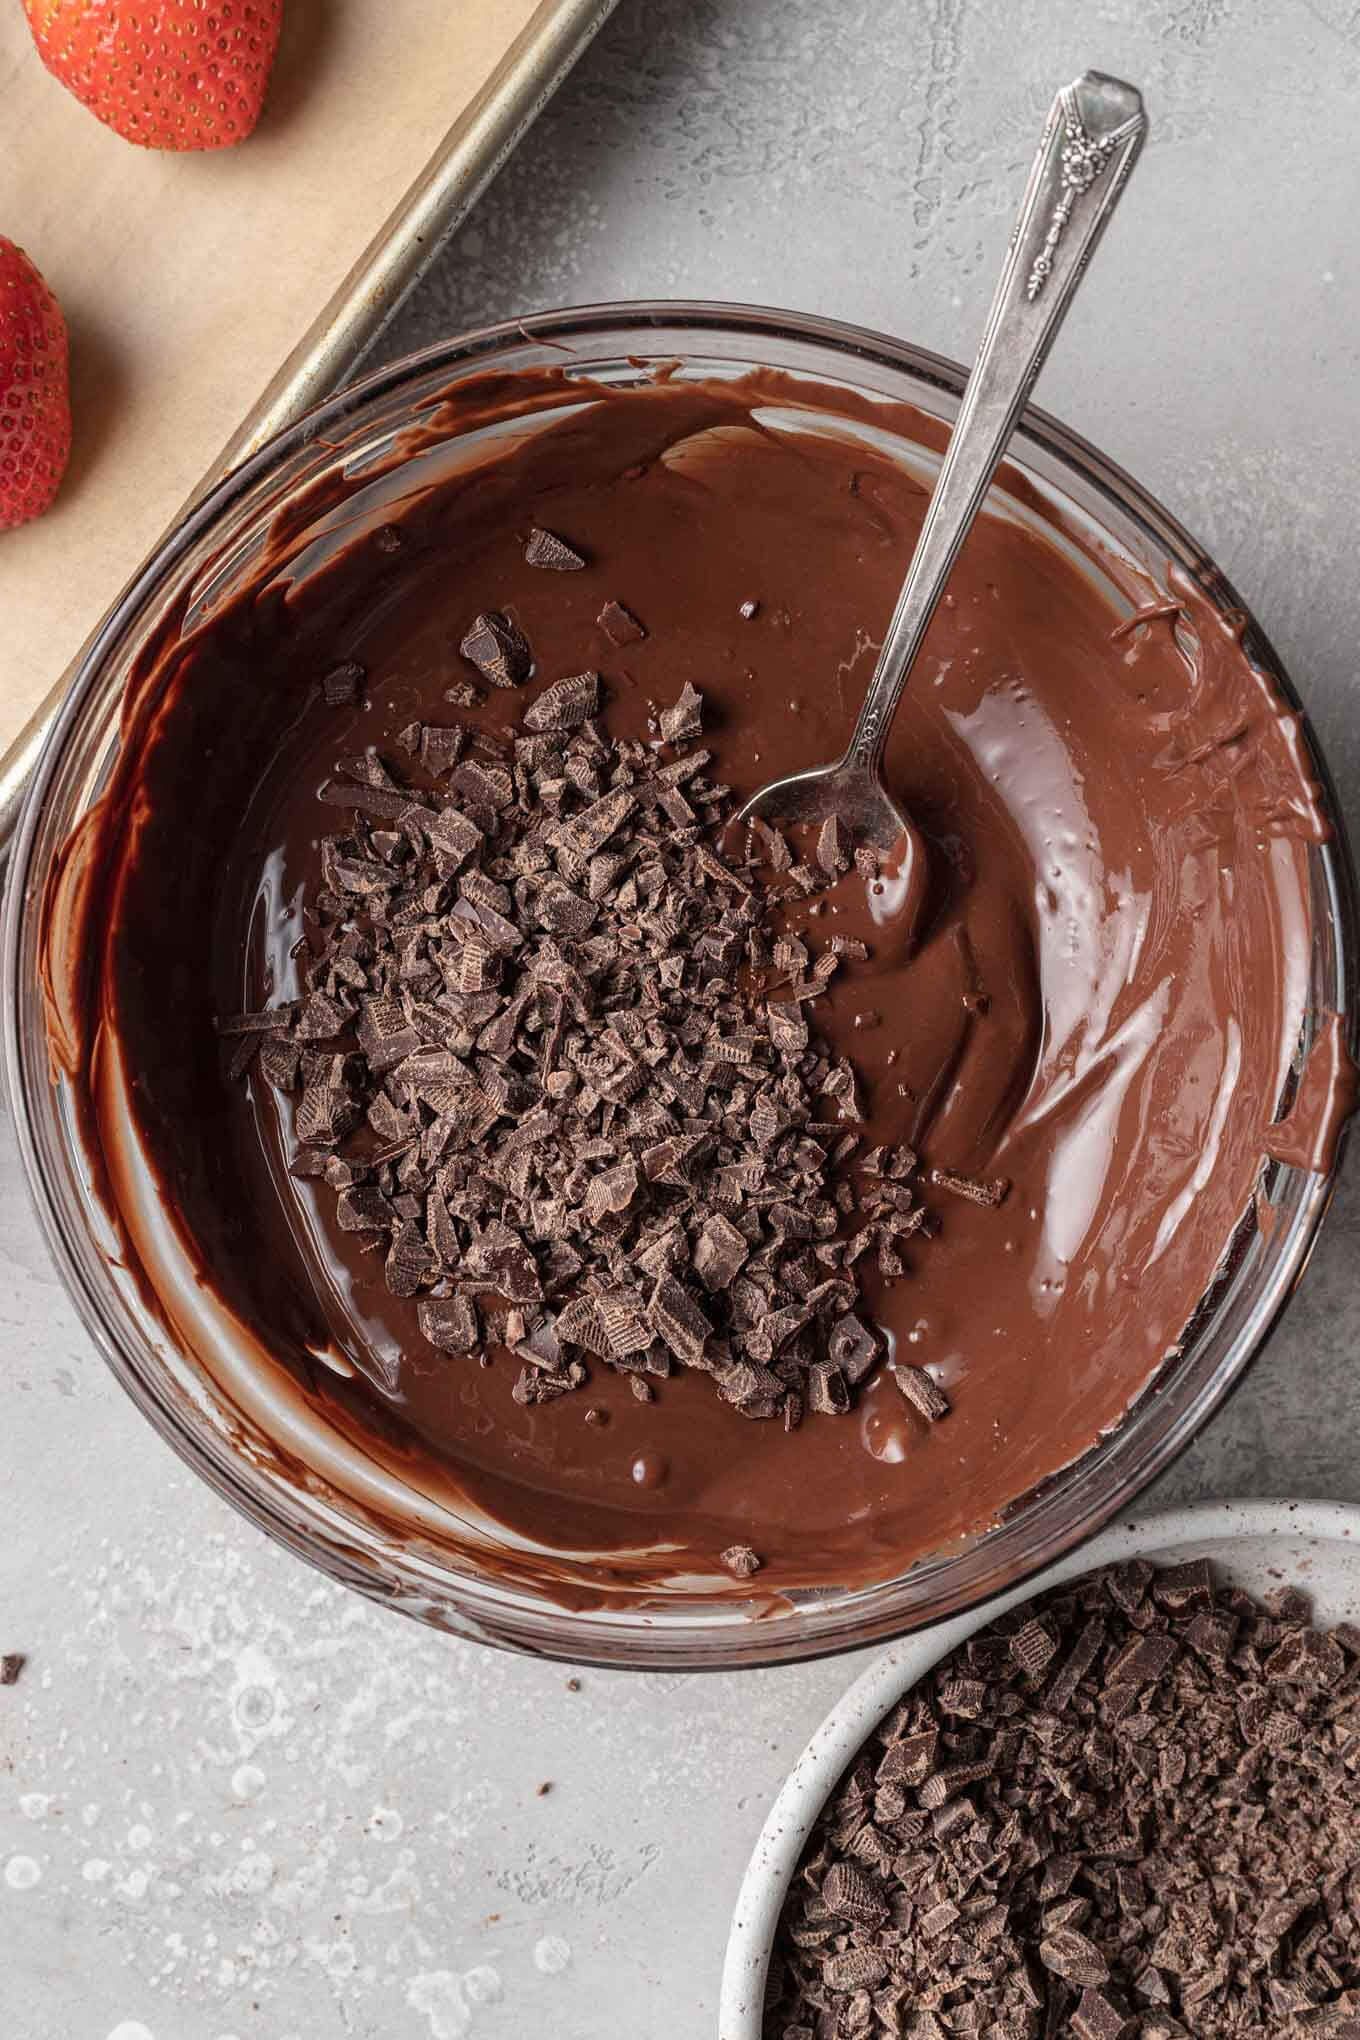 A glass mixing bowl with melted chocolate and chopped chocolate pieces.